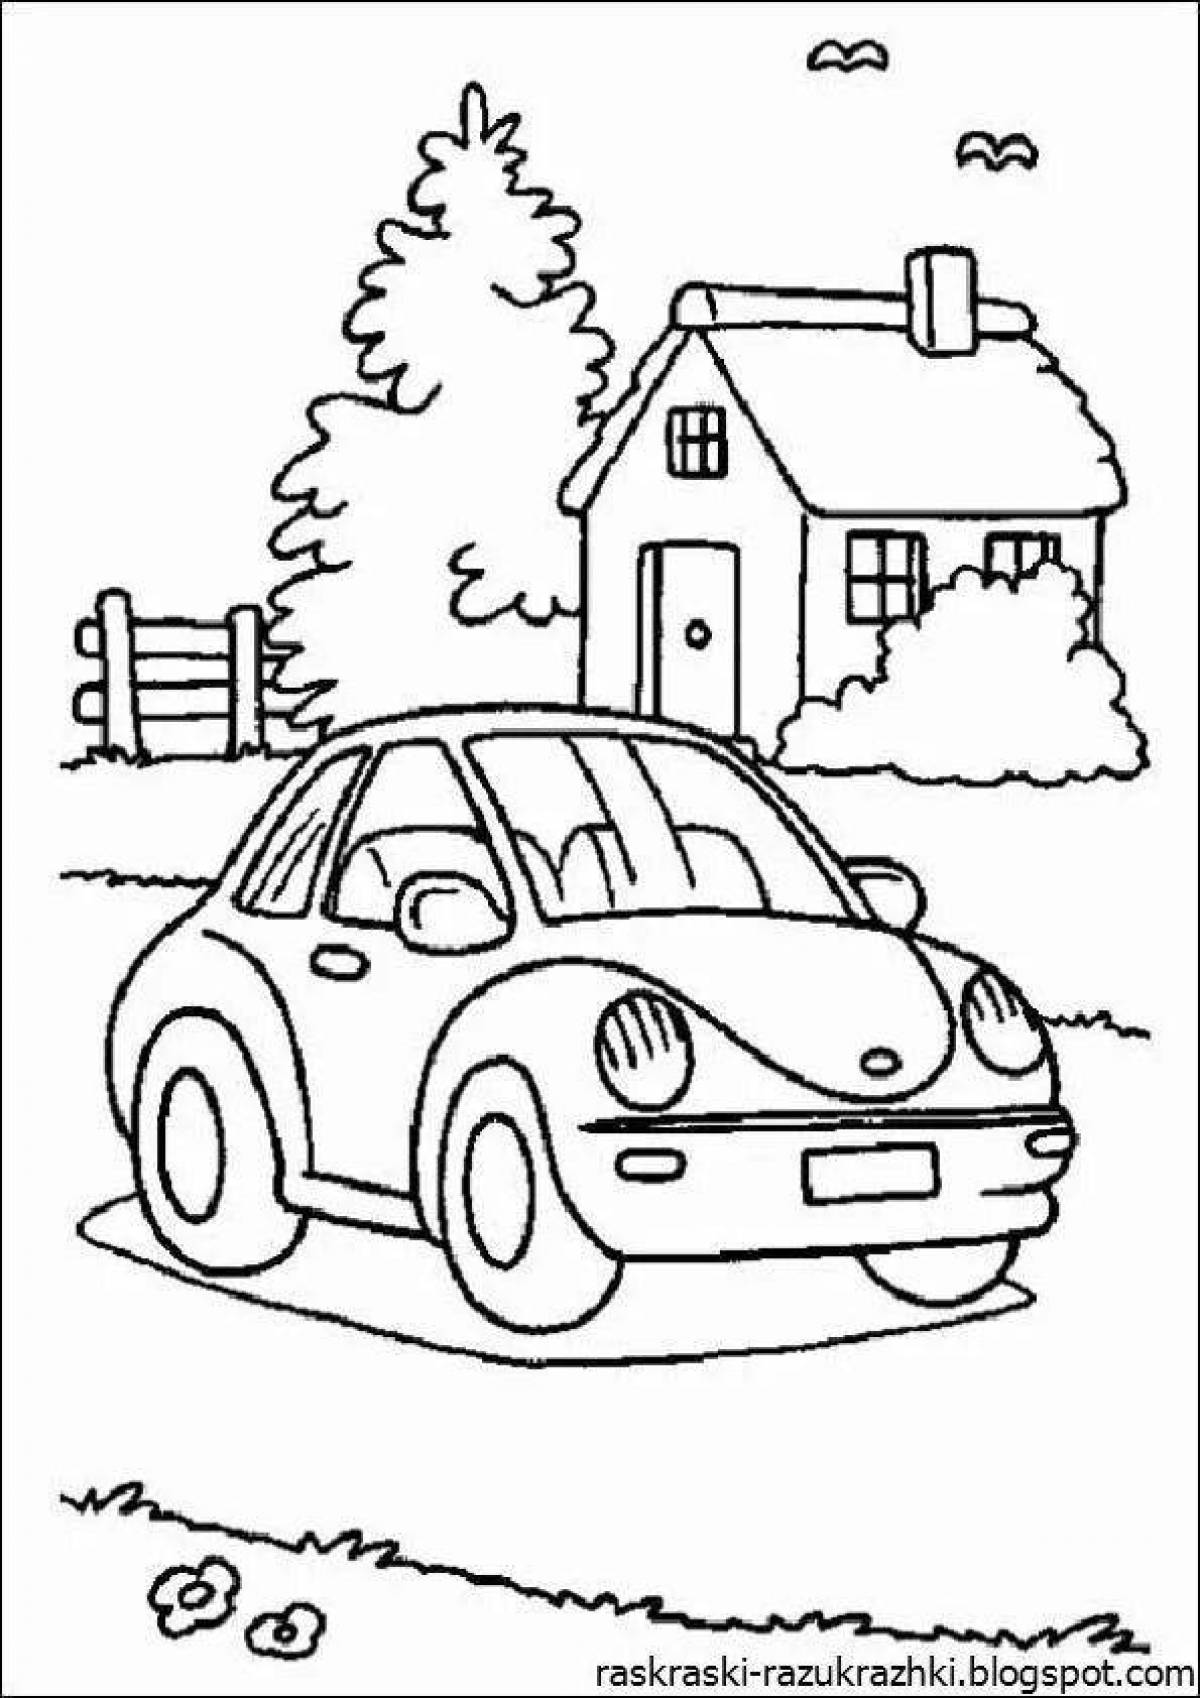 Coloring game colorful cars for boys 3-4 years old